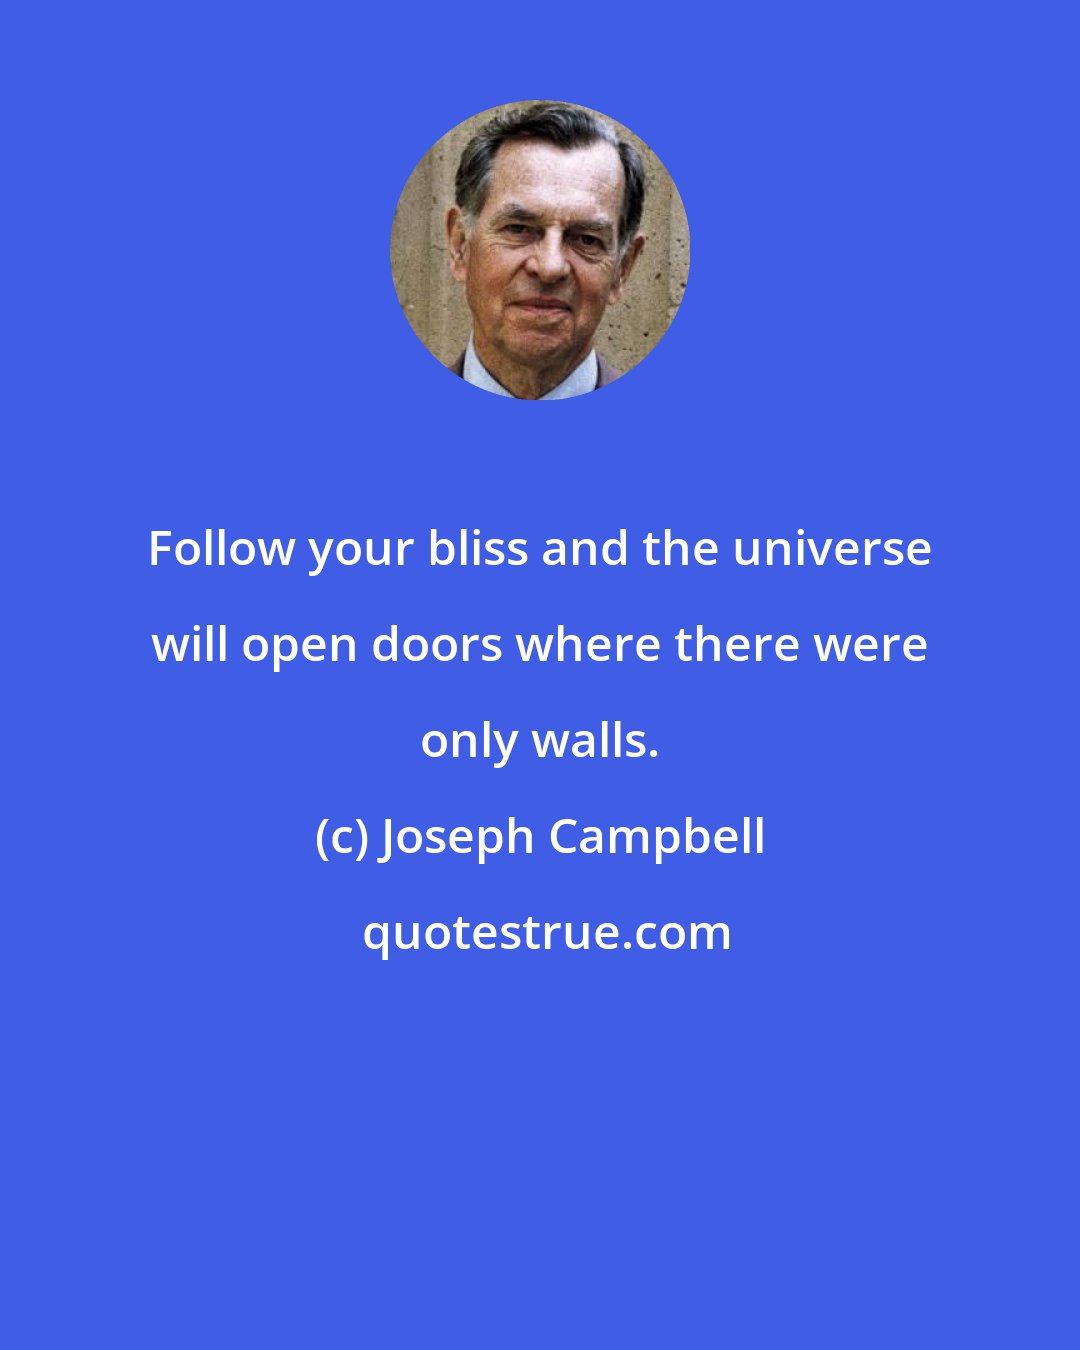 Joseph Campbell: Follow your bliss and the universe will open doors where there were only walls.